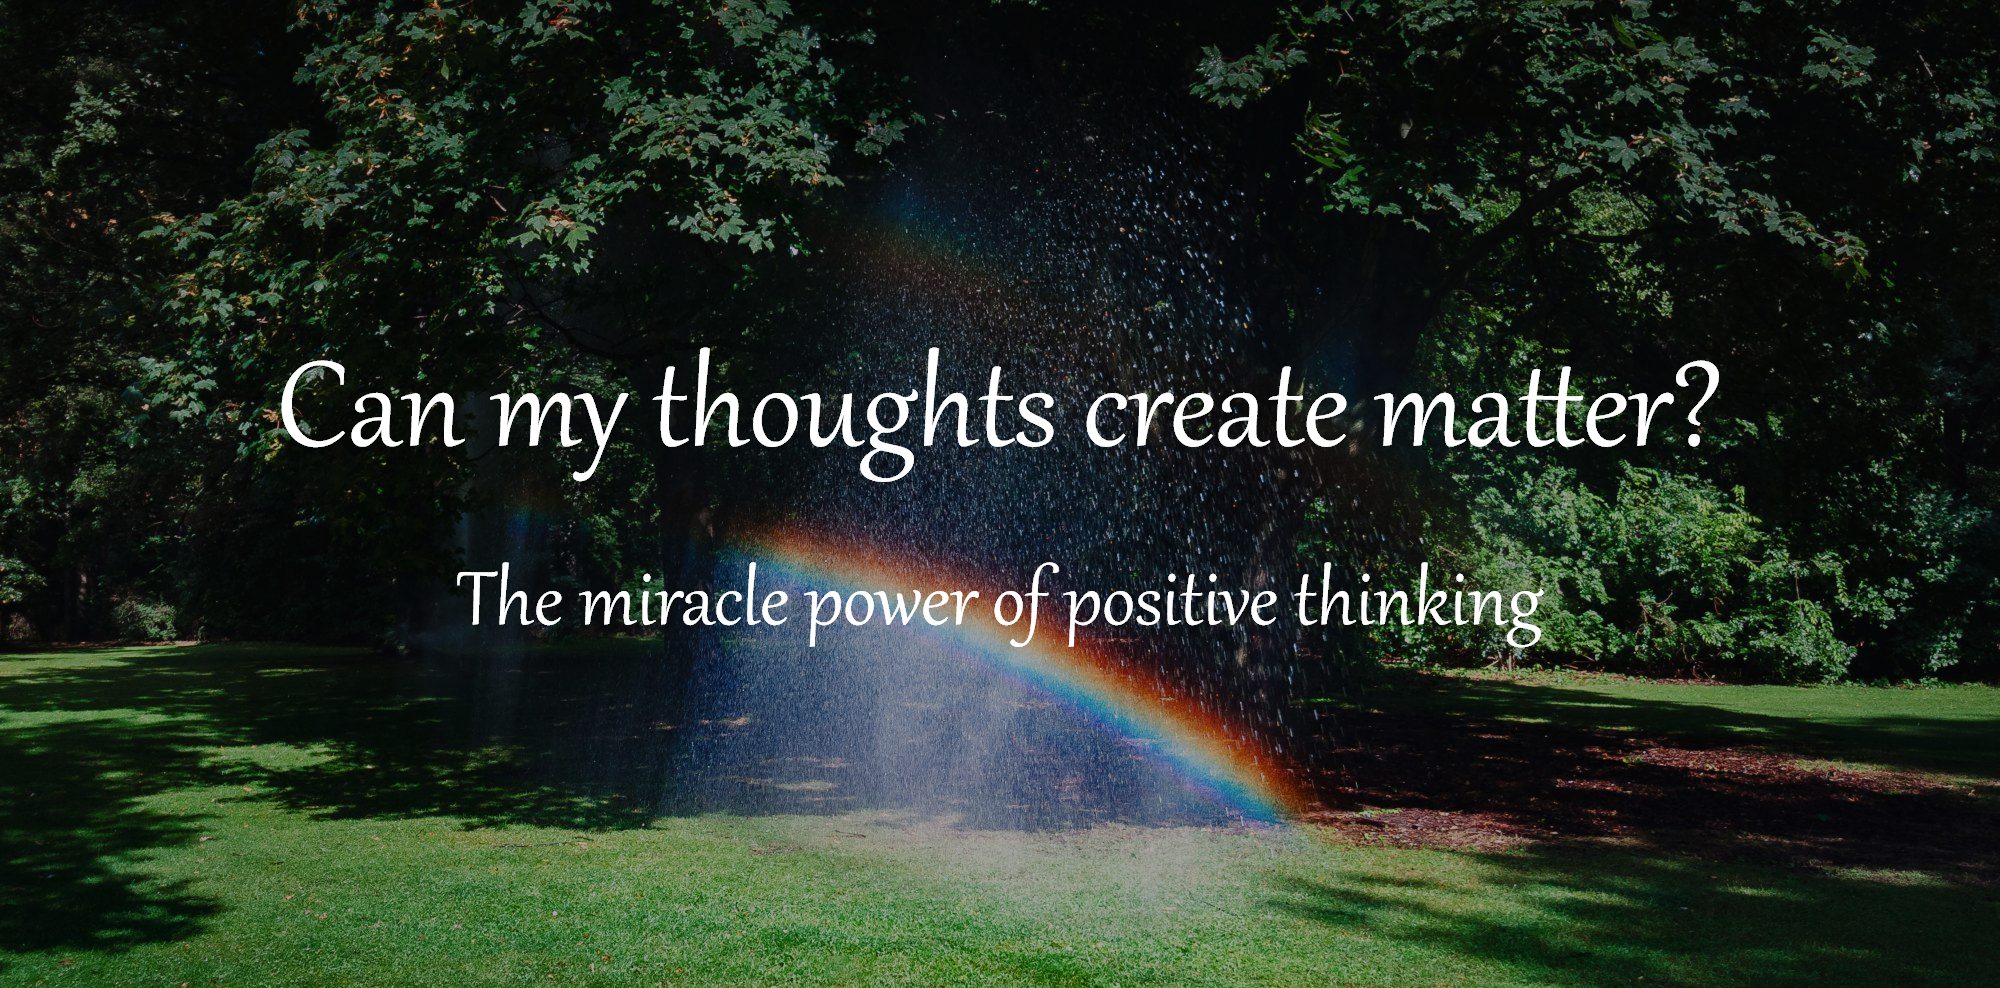 Can my thoughts create matter? Does positive thinking work? Reality